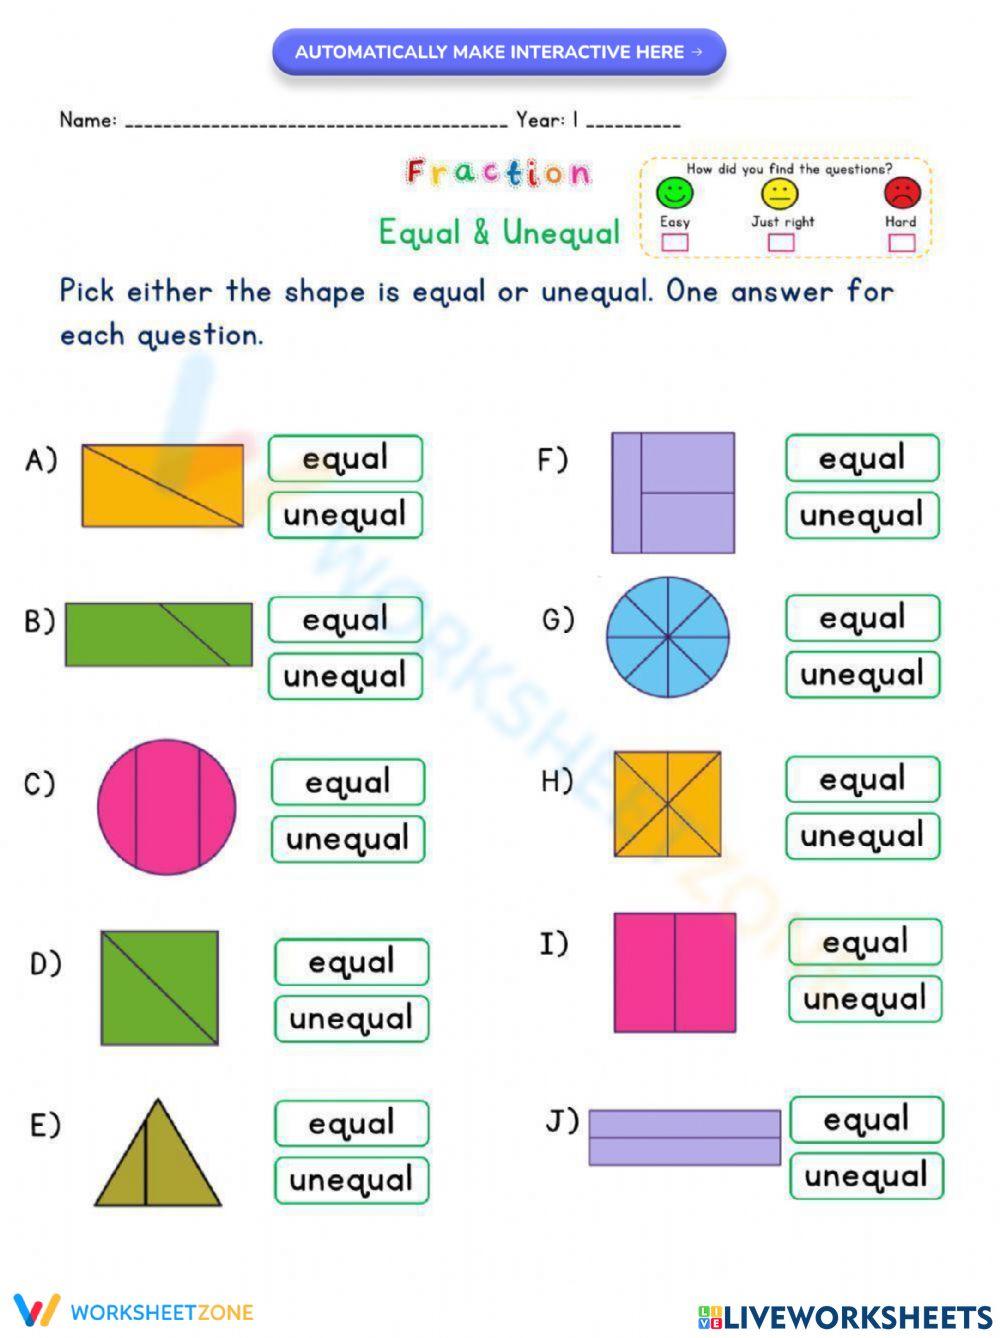 Equal and Unequal Fraction